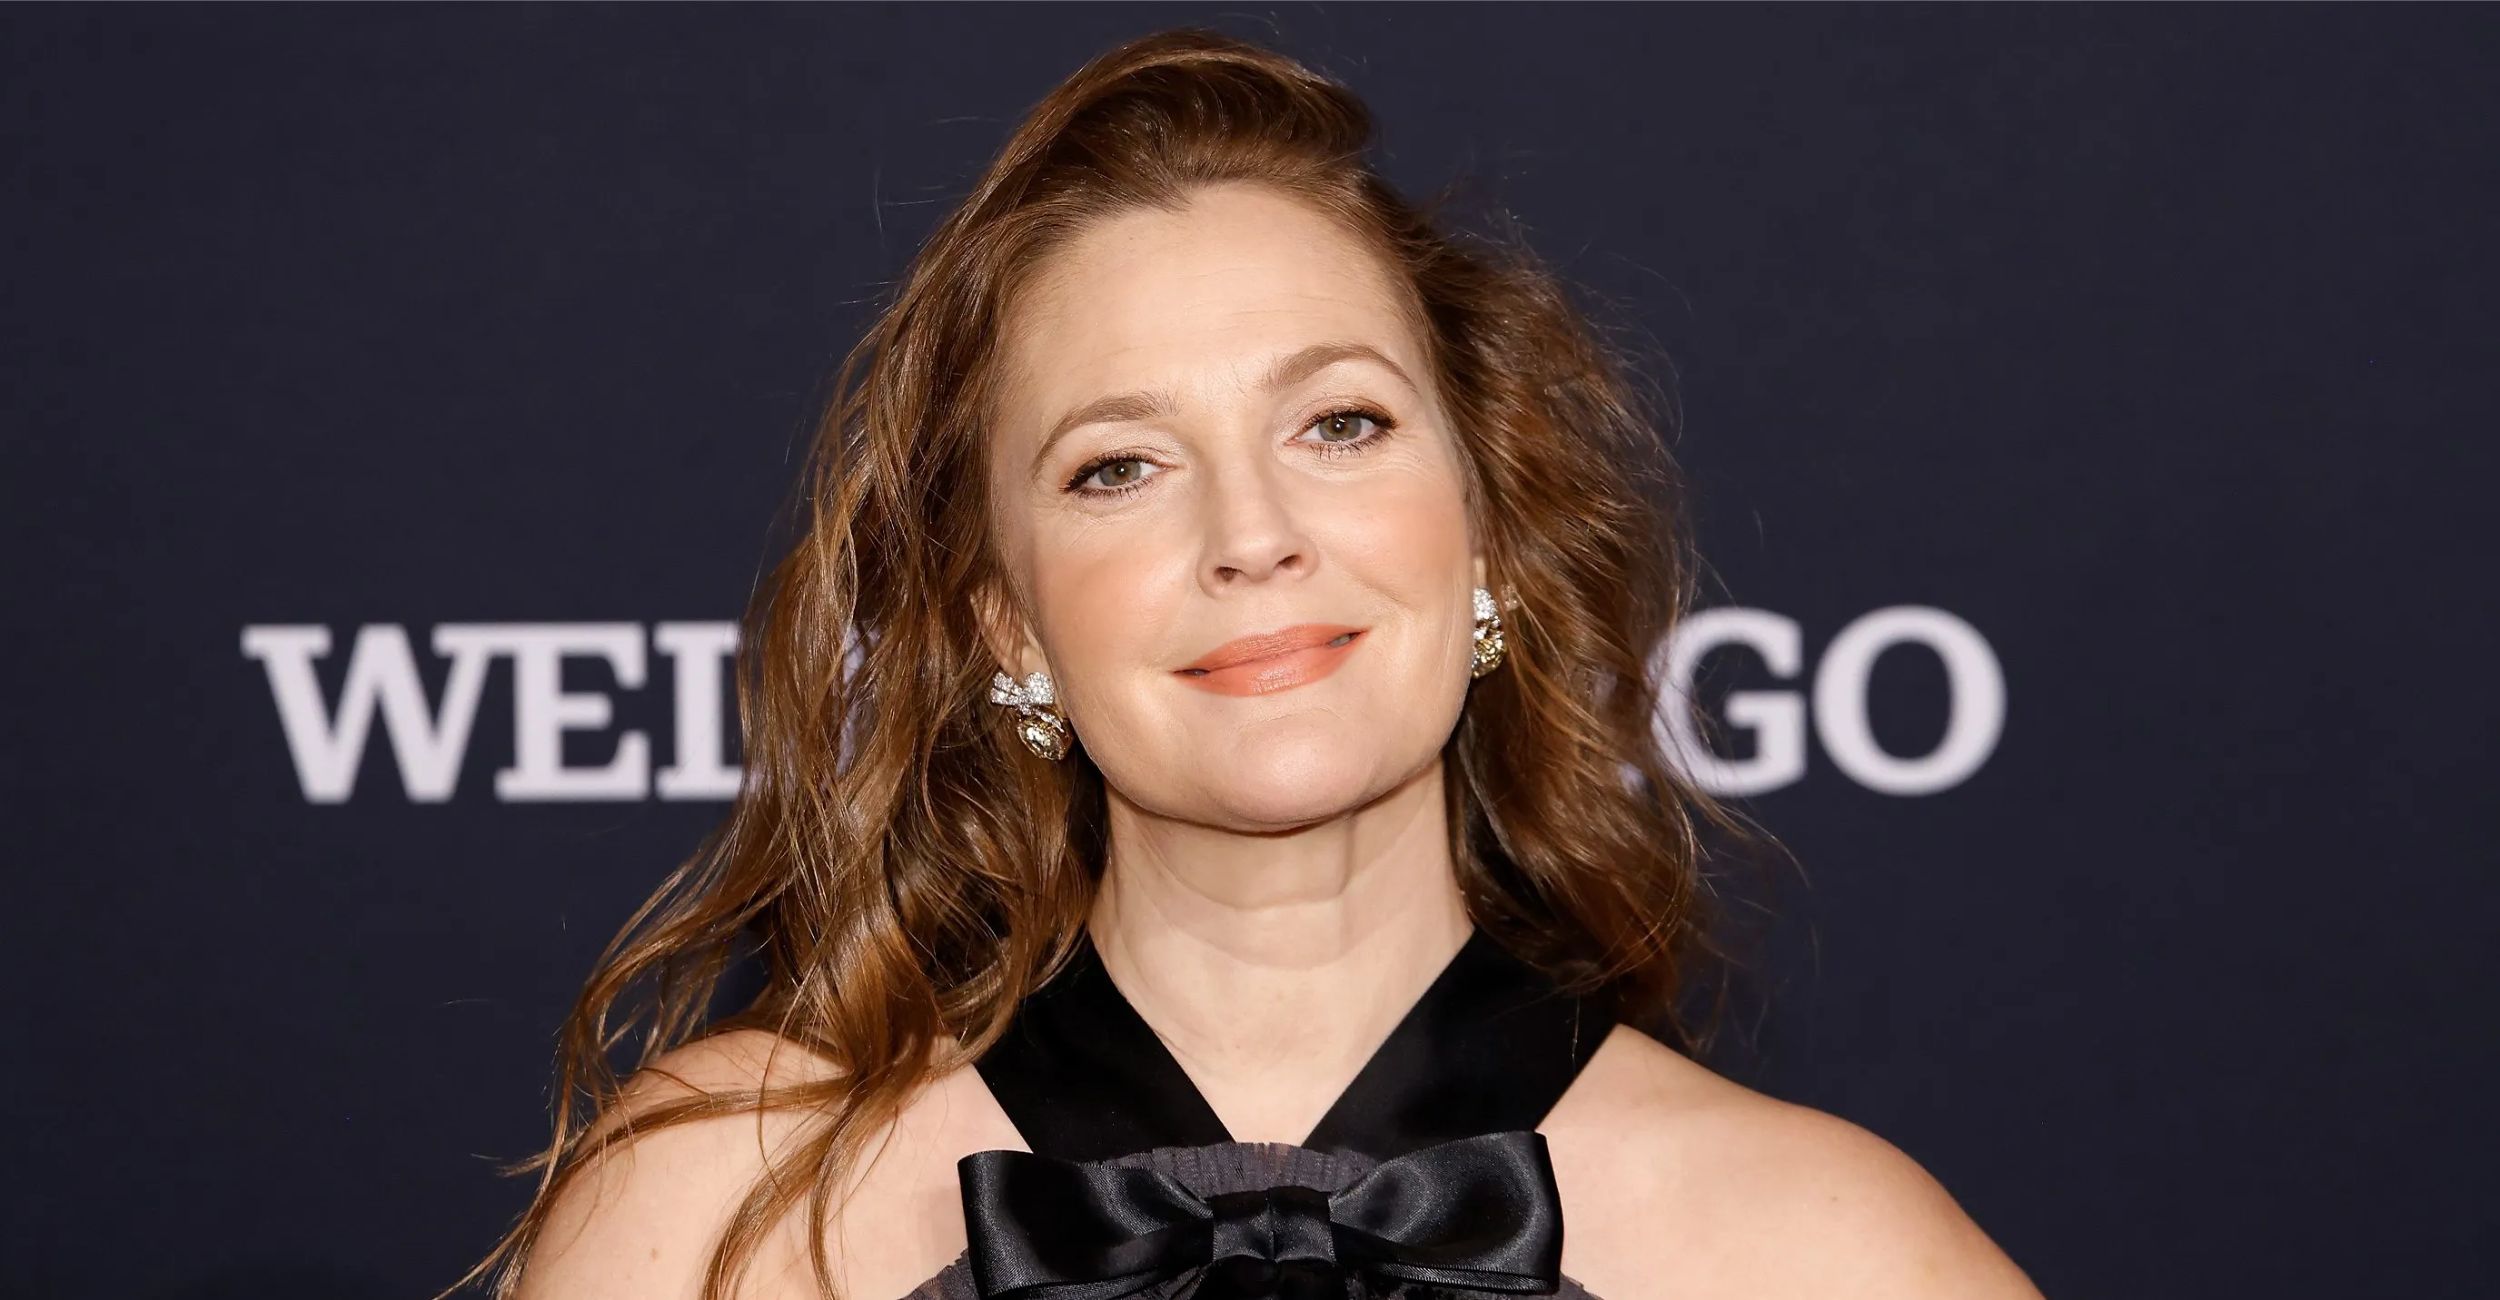 Drew Barrymore’s Talk Show Returns Amid Strike, Faces Criticism From WGA